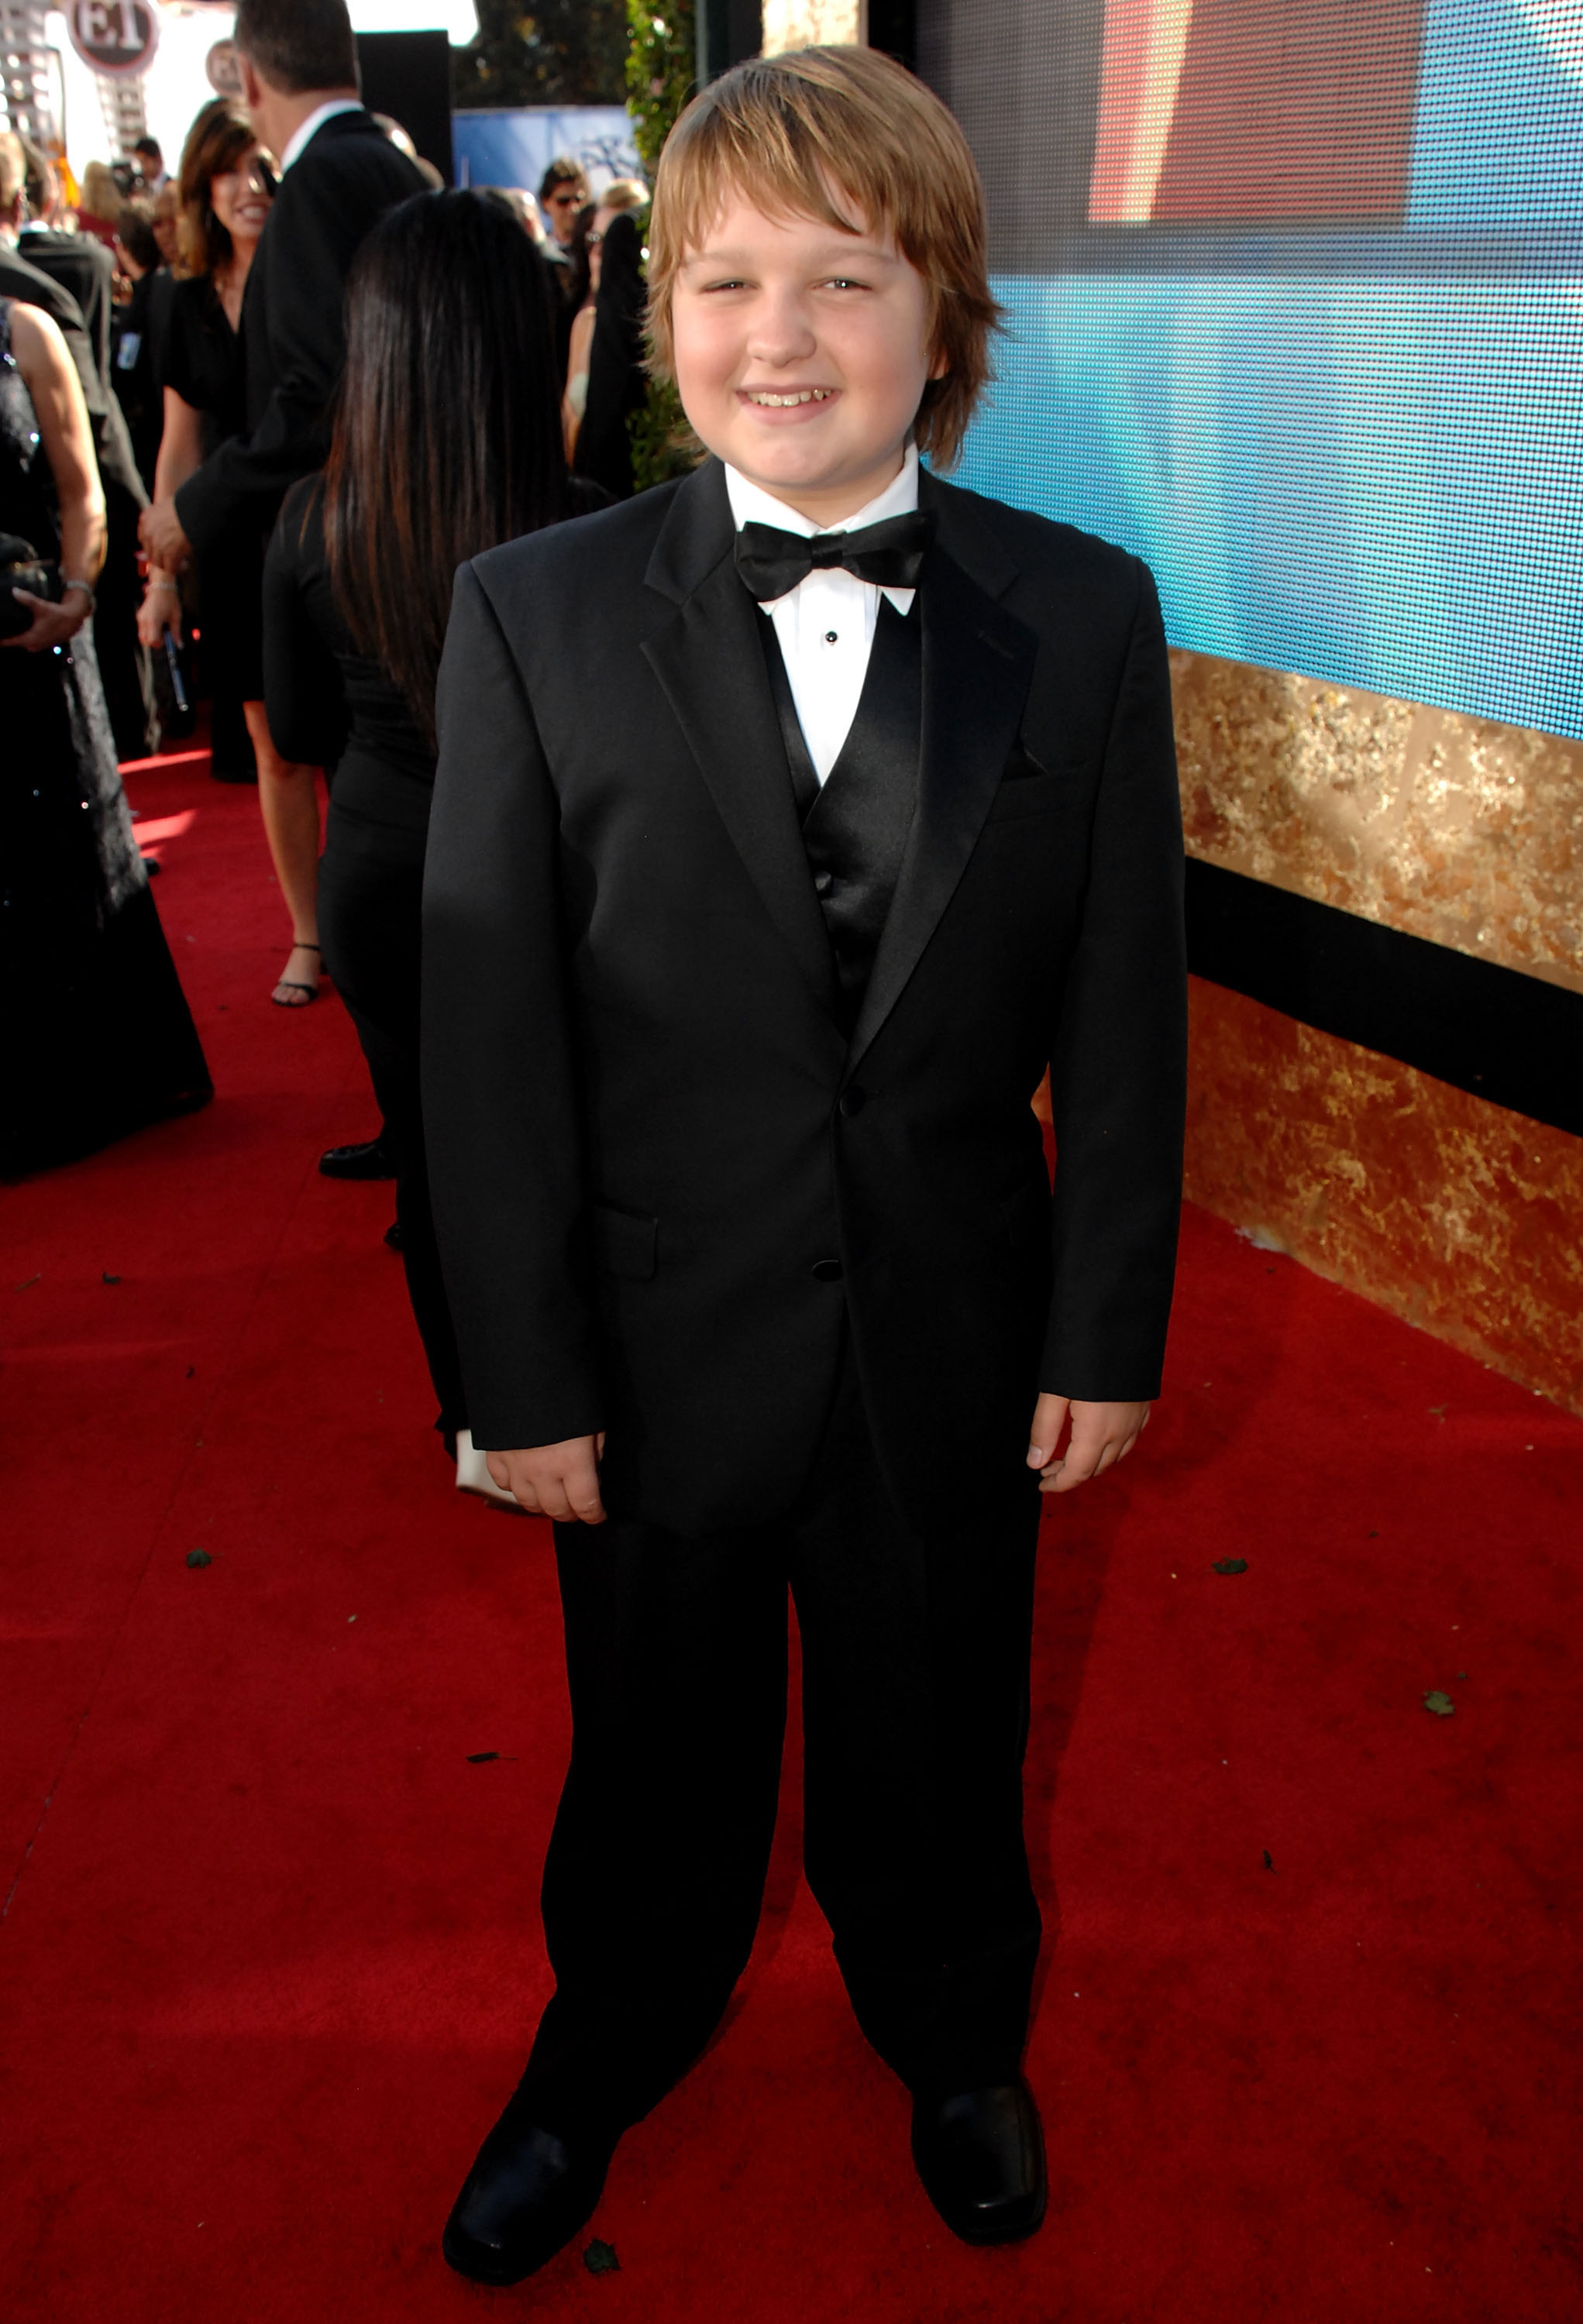 Angus T. Jones at the "Harry Potter and The Order of the Phoenix" at the Emmy Awards in 2007 | Source: Getty Images